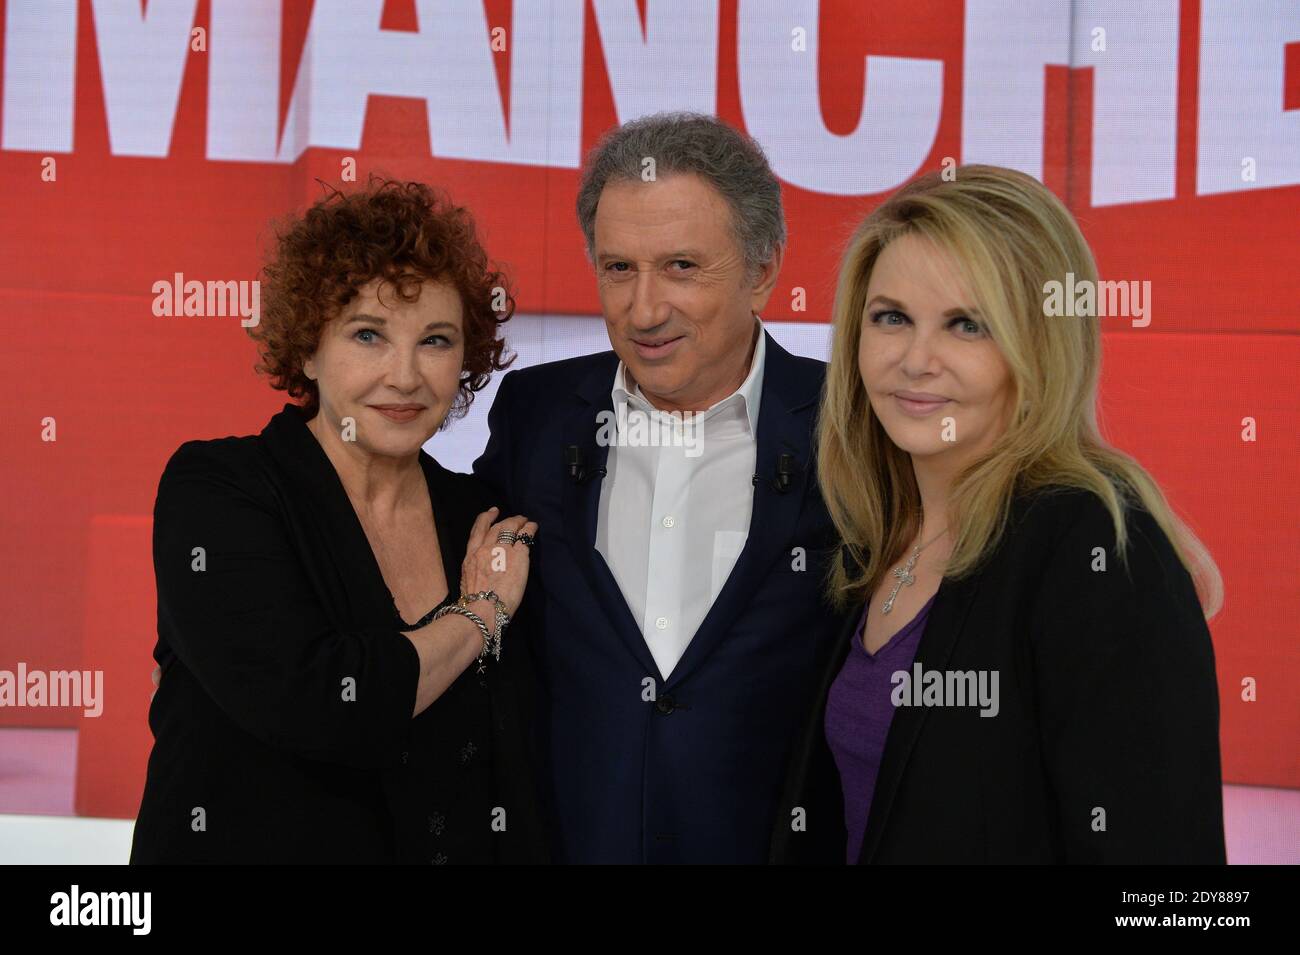 Marlene Jobert, Michel Drucker and Nathalie Rheims at the taping of Vivement Dimanche in Paris, France, December 2, 2014. Photo by Max Colin/ABACAPRESS.COM Stock Photo